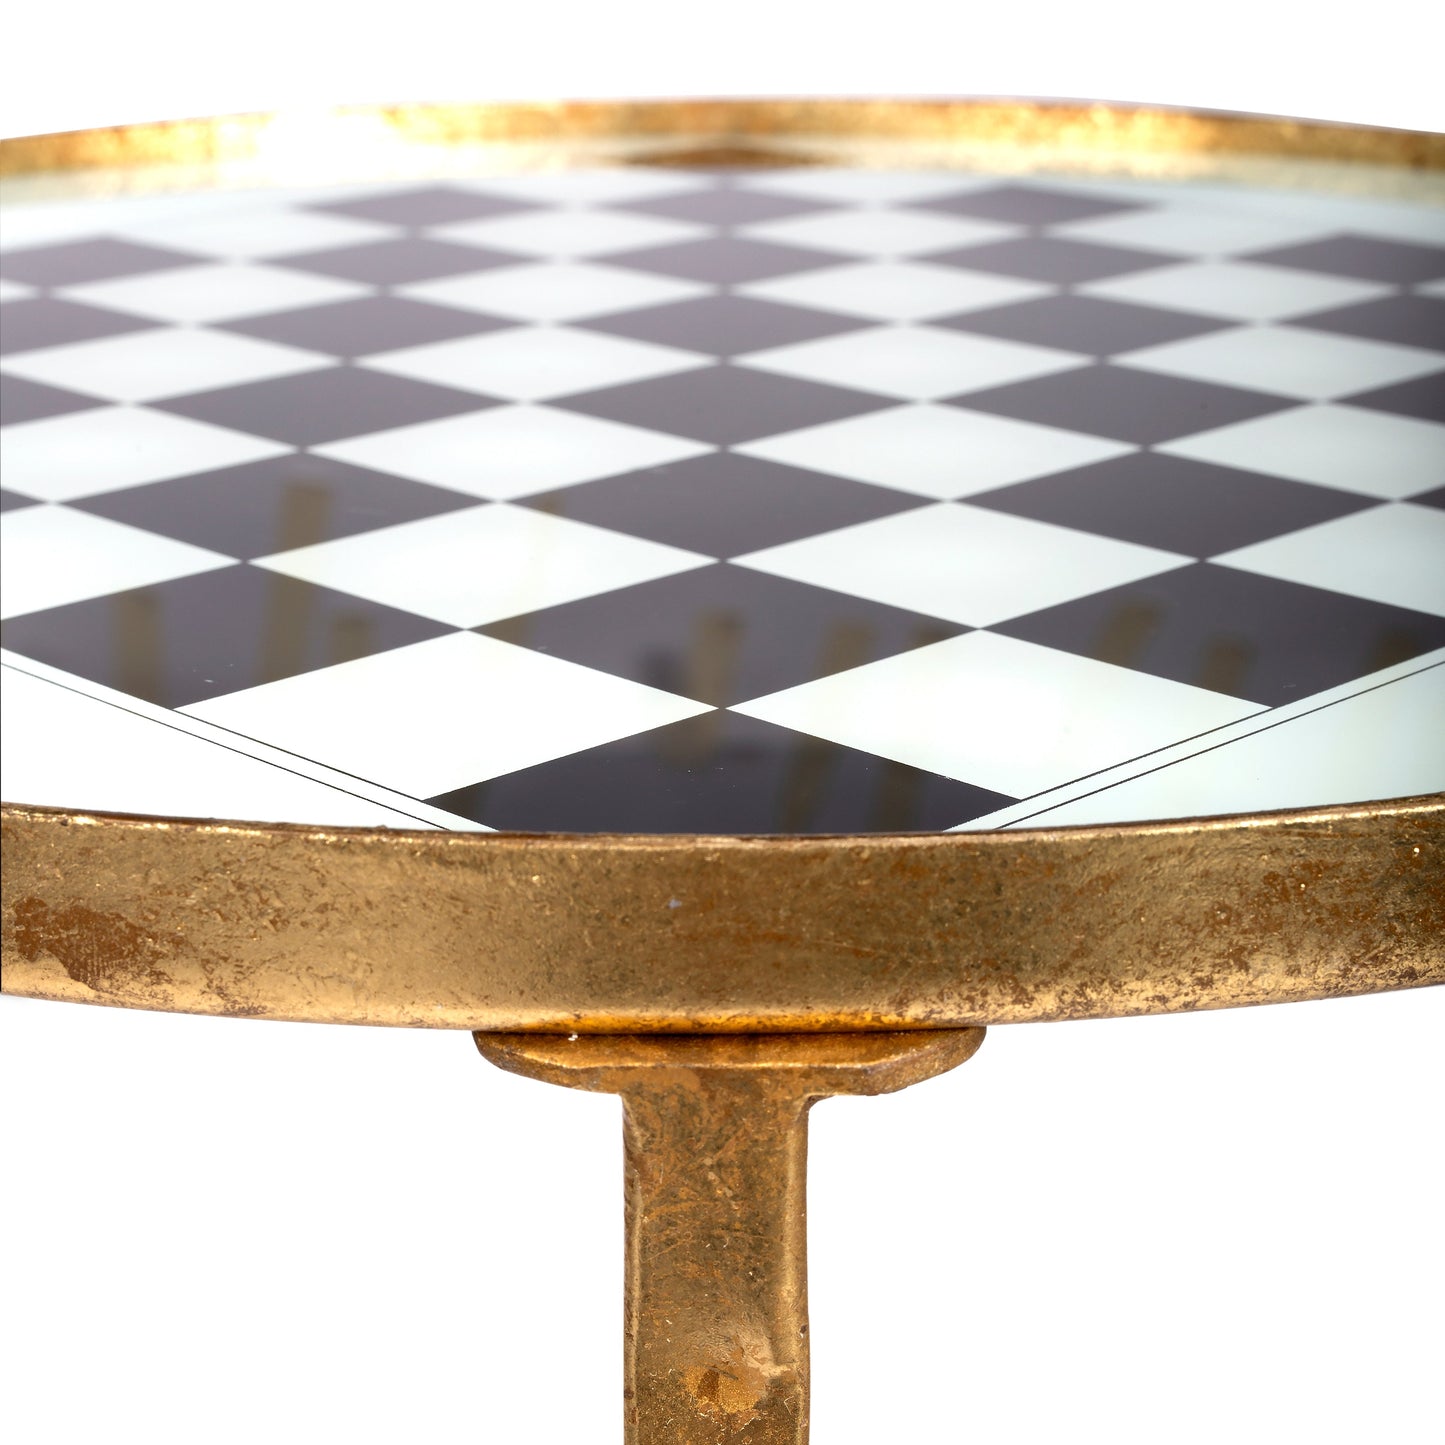 Butler Specialty Company Judith Antique Game Table, Gold-Game Table Genie